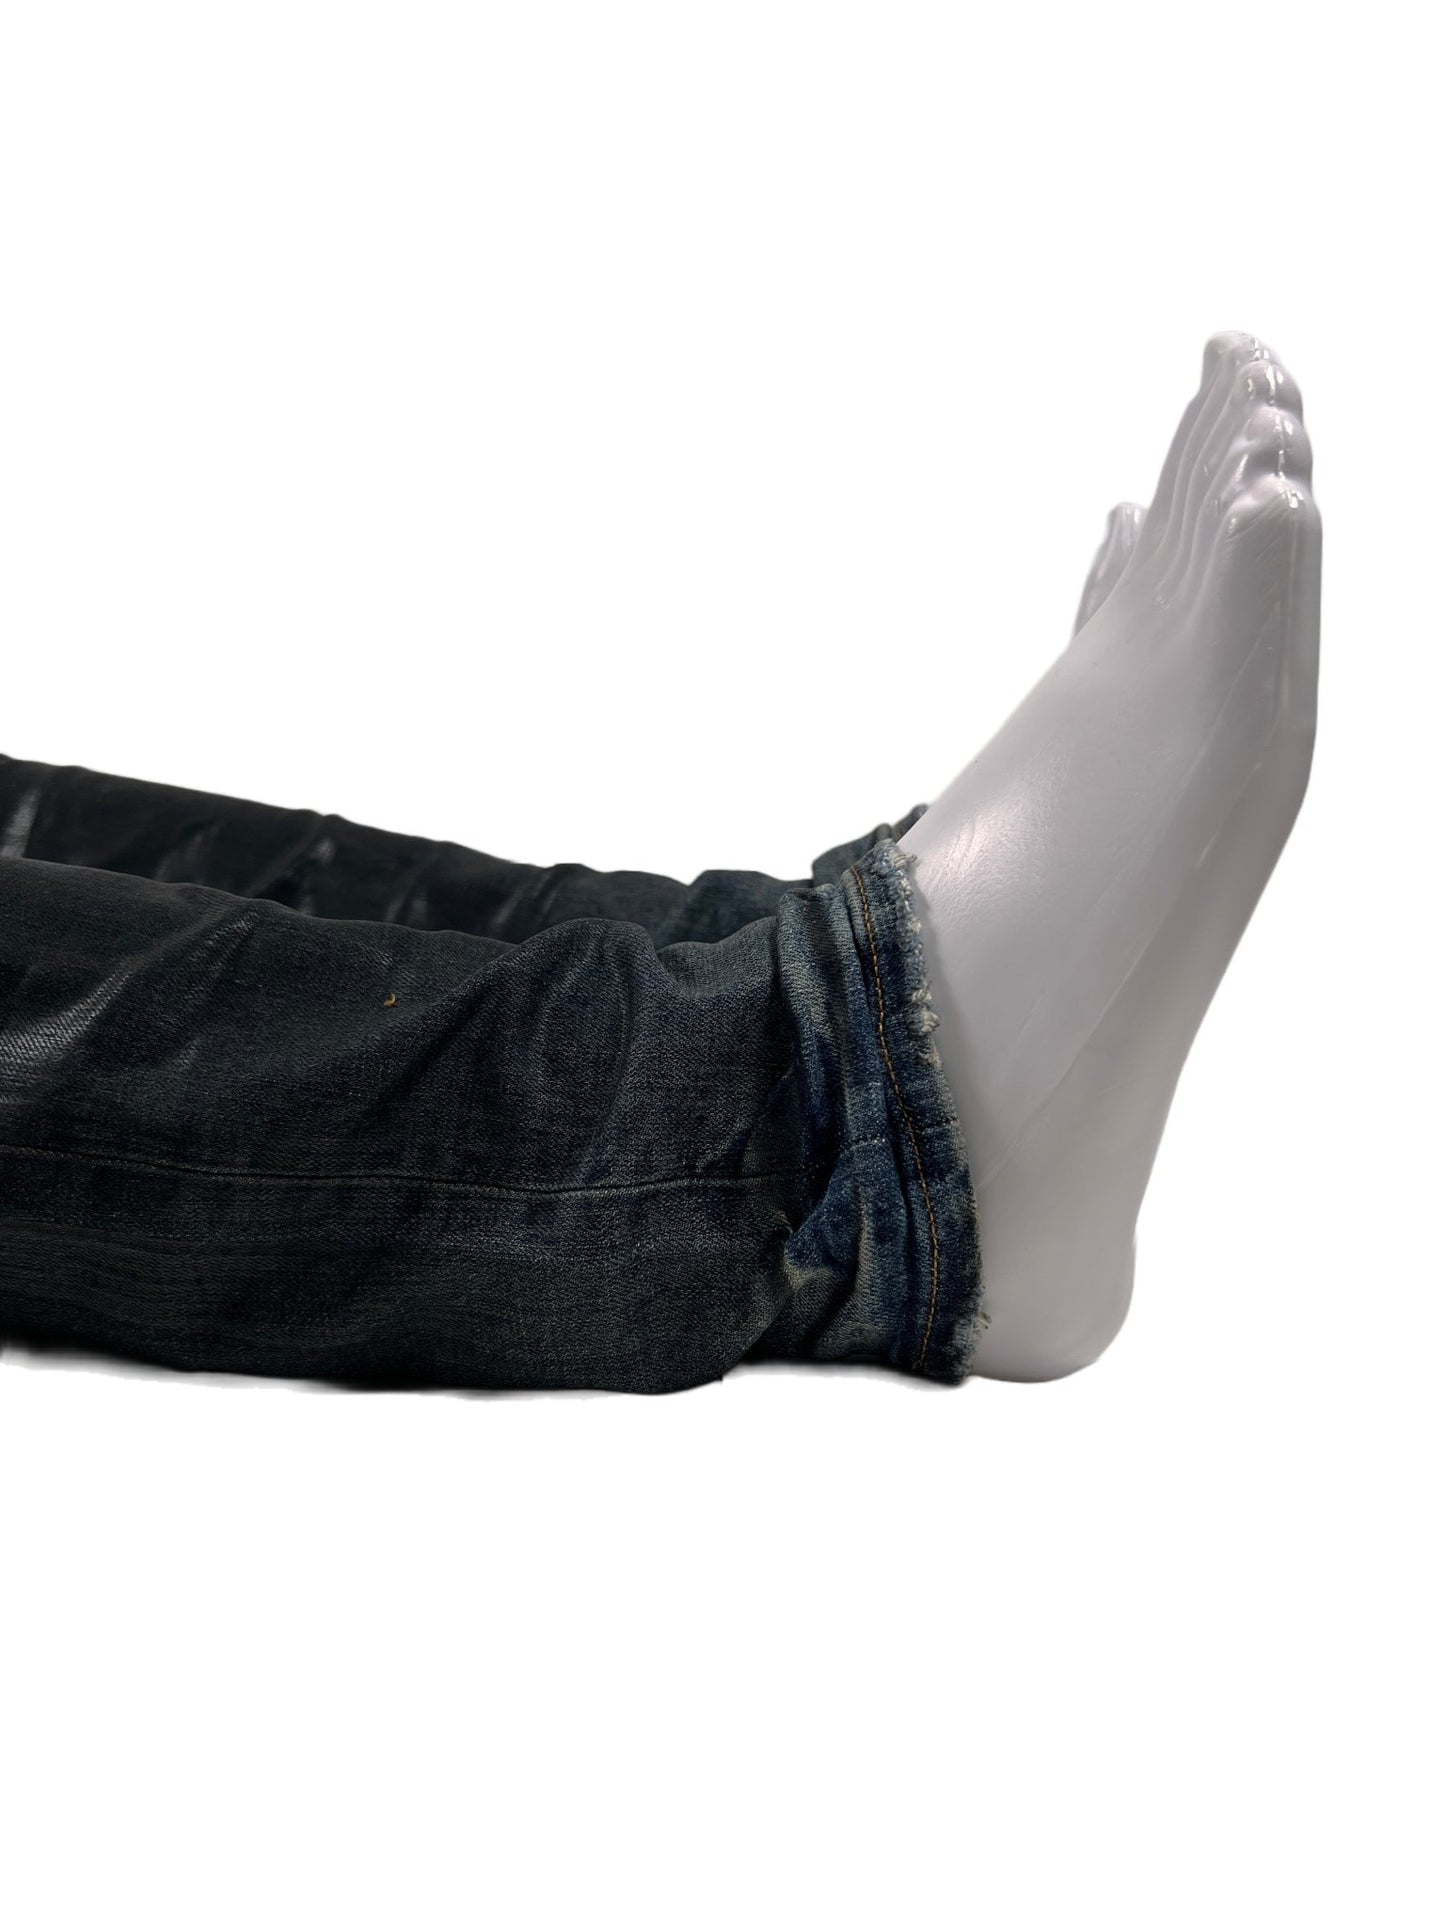 A mannequin laying on a white background with a pair of PURPLE BRAND JEANS P001-IBCG MID INDIGO BLACK COATED GRADIENT.